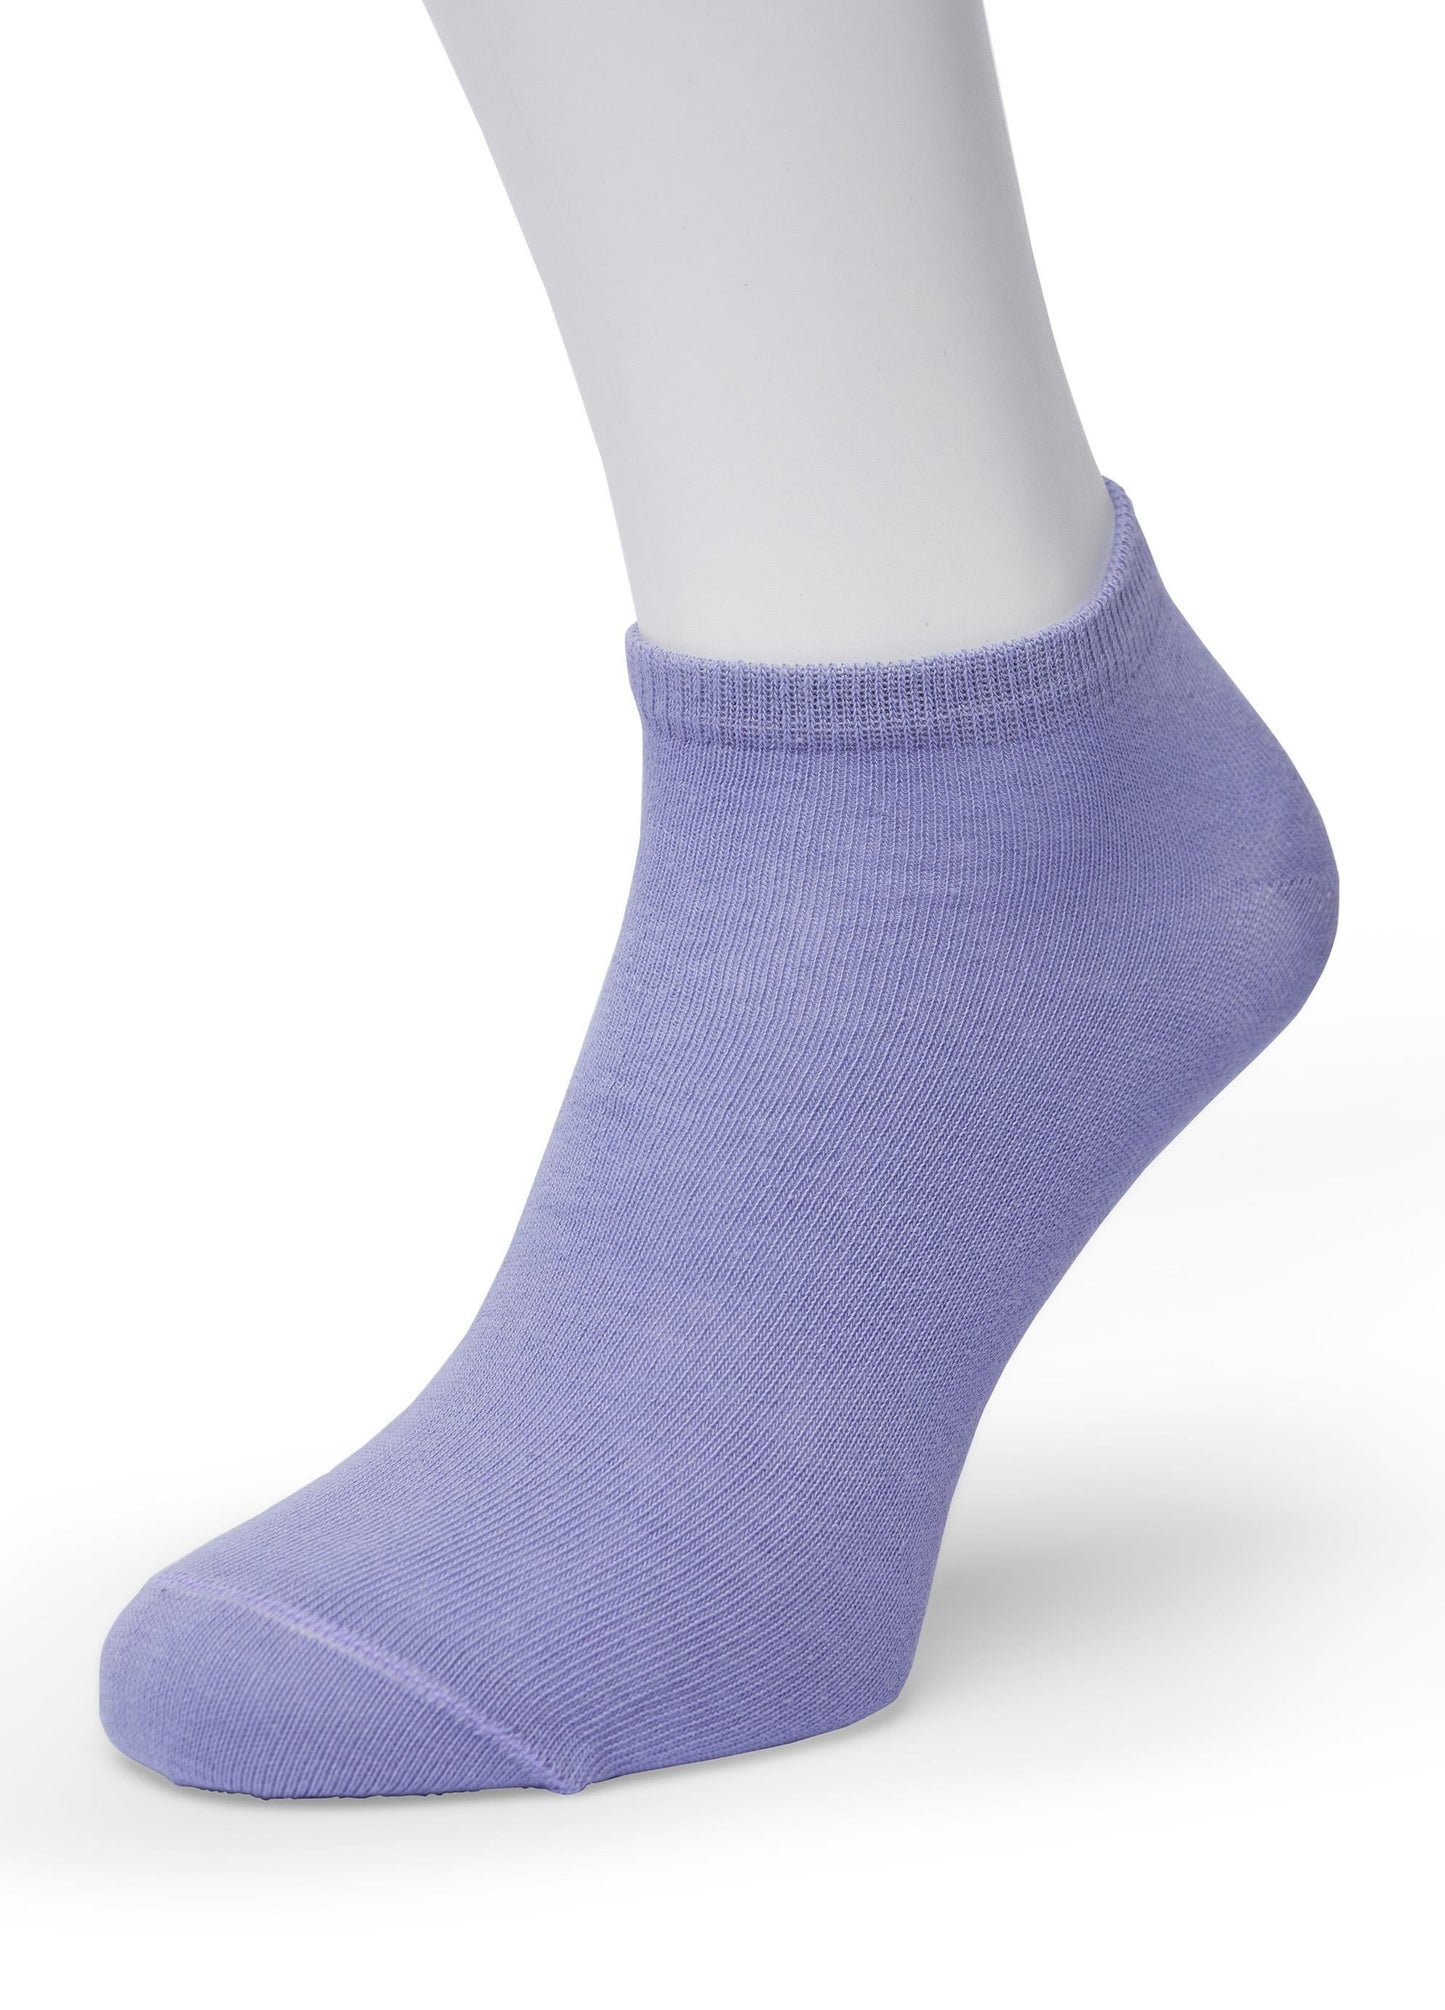 Bonnie Doon BD811001 Cotton Short Ankle Sock - Lillac (cosmic sky) Low rise cotton mix socks with flat toe seam and plain elasticated cuff. 